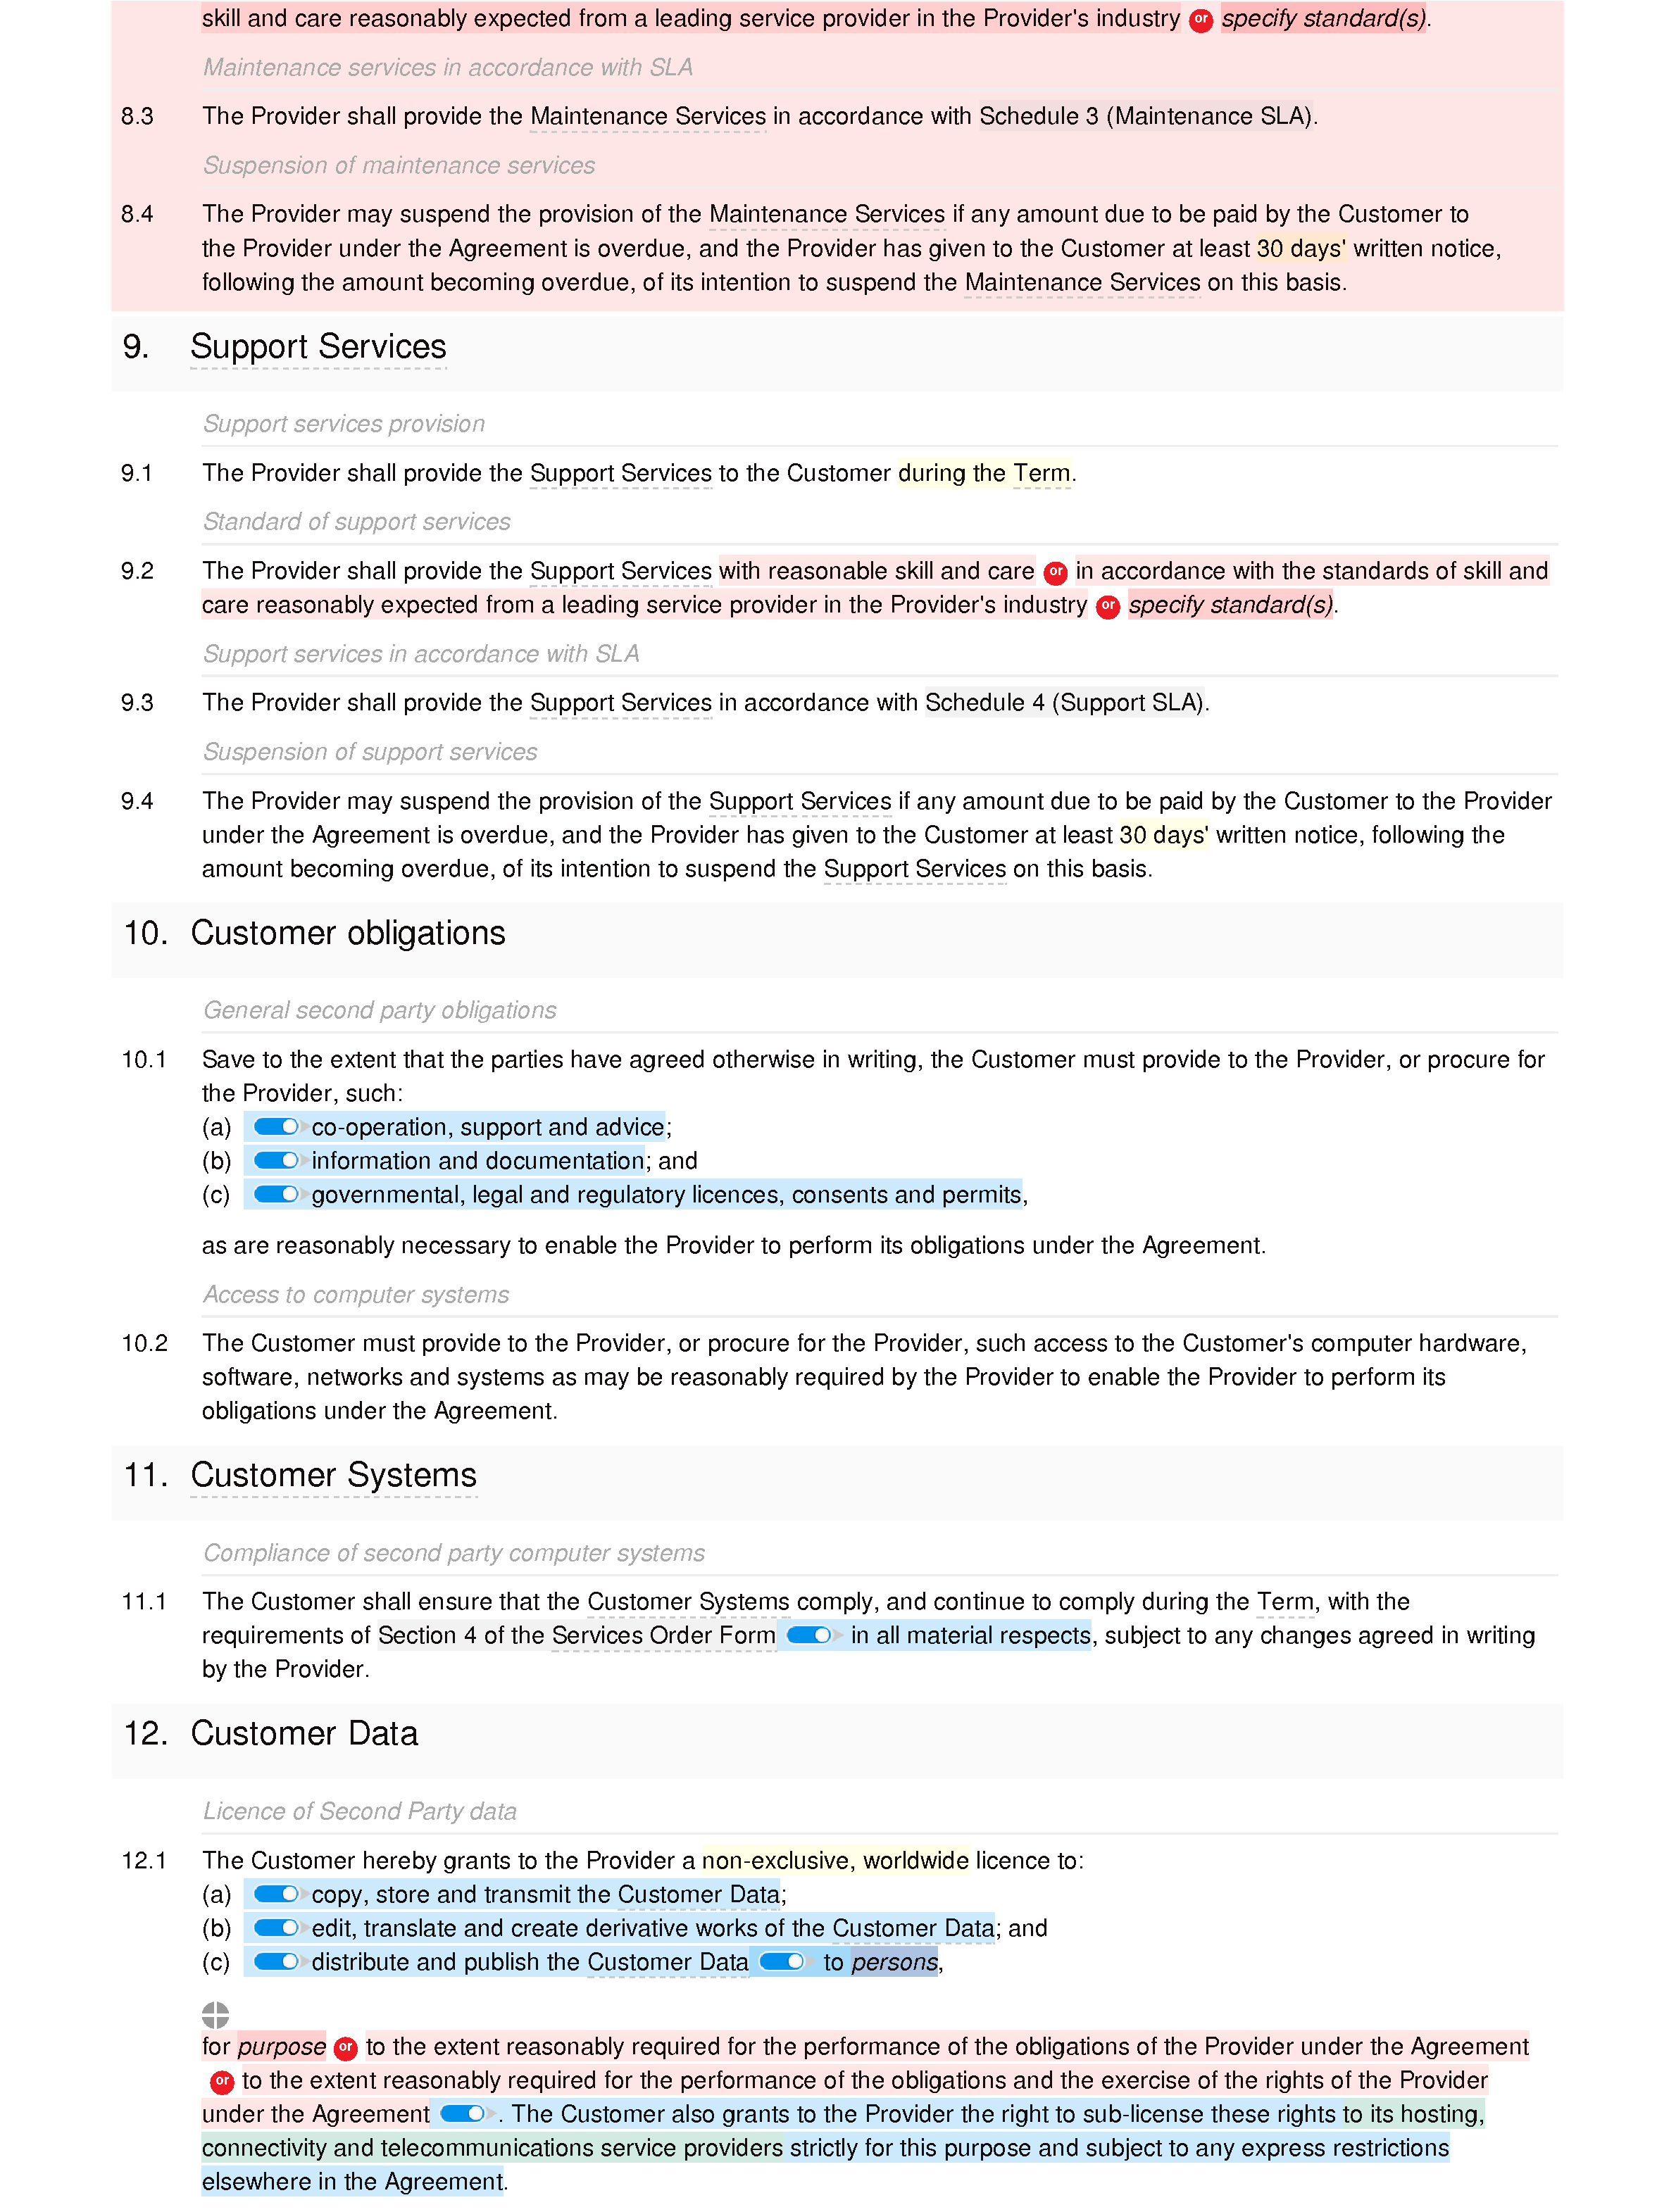 SaaS terms and conditions (premium) document editor preview